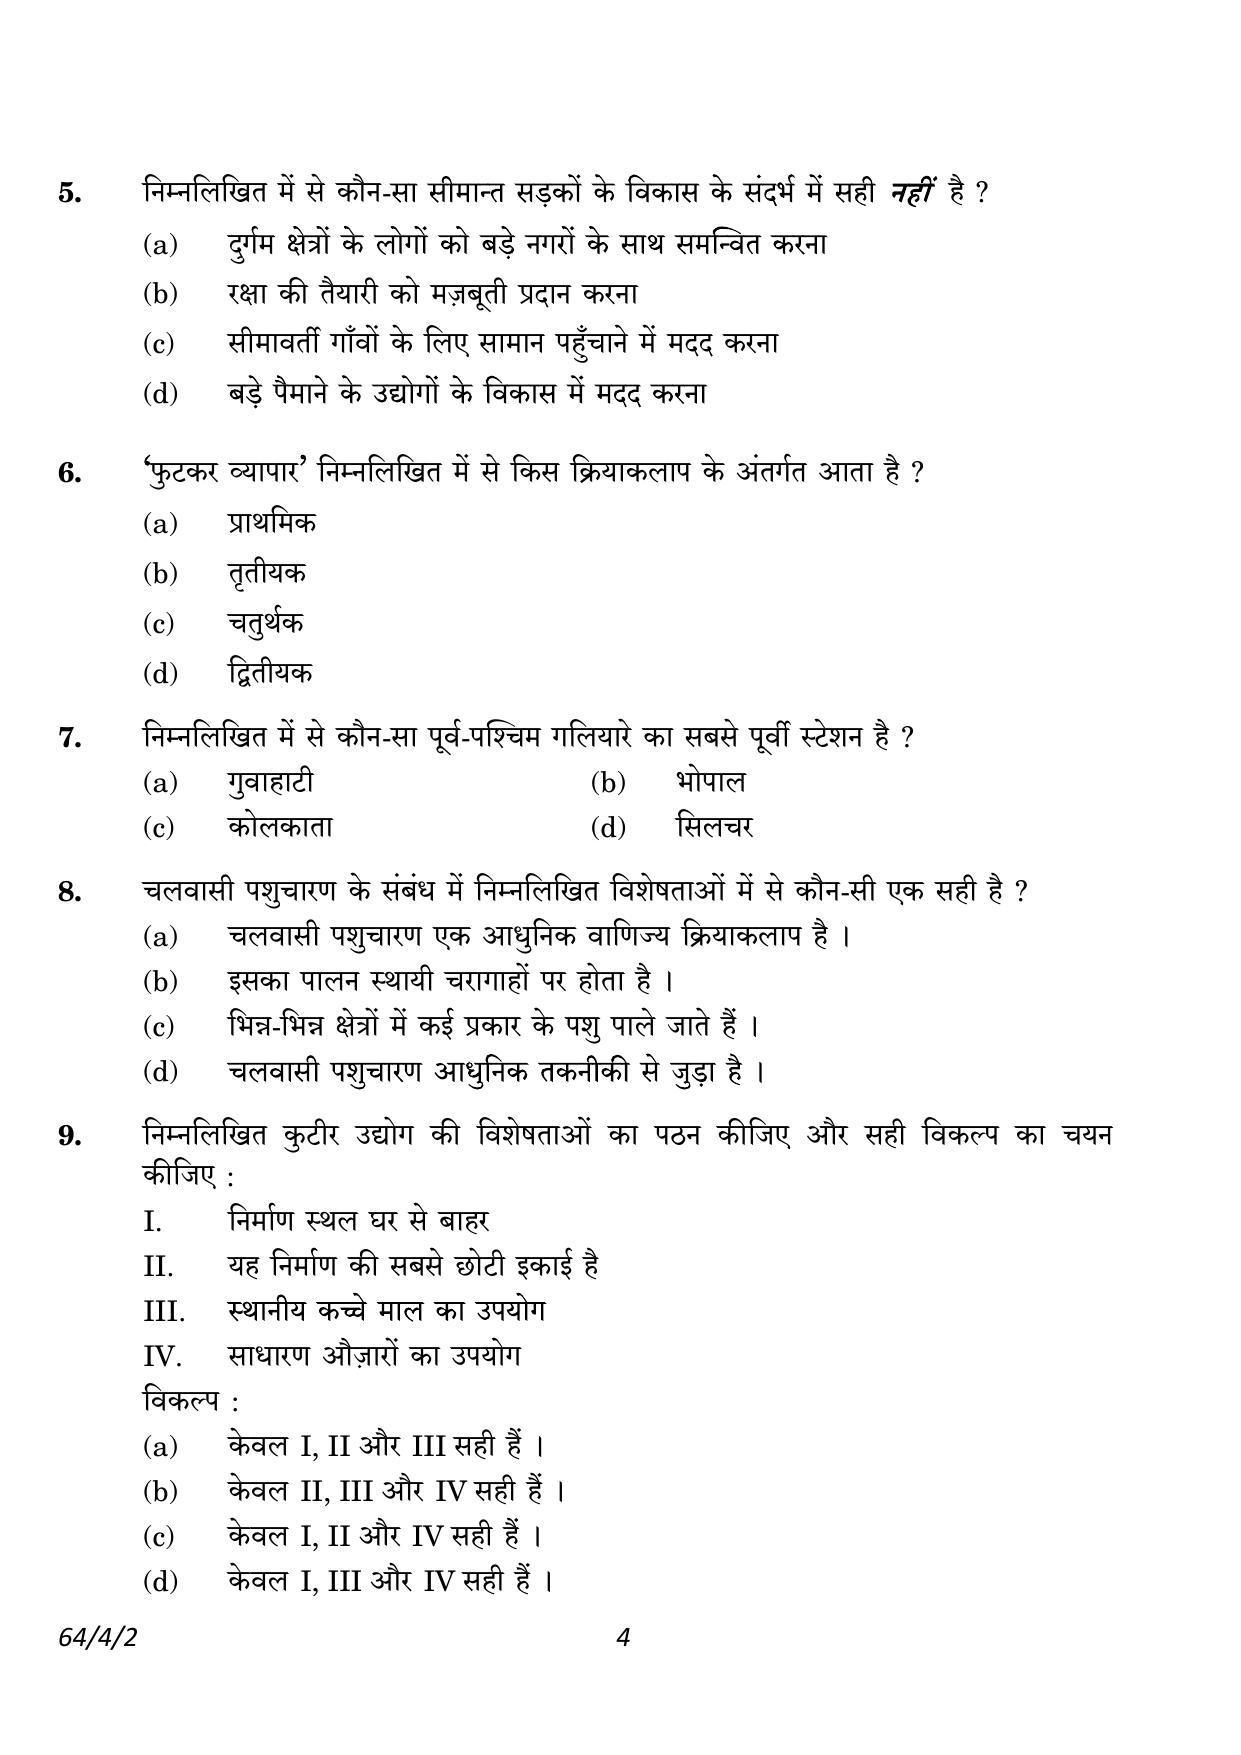 CBSE Class 12 64-4-2 Geography 2023 Question Paper - Page 4